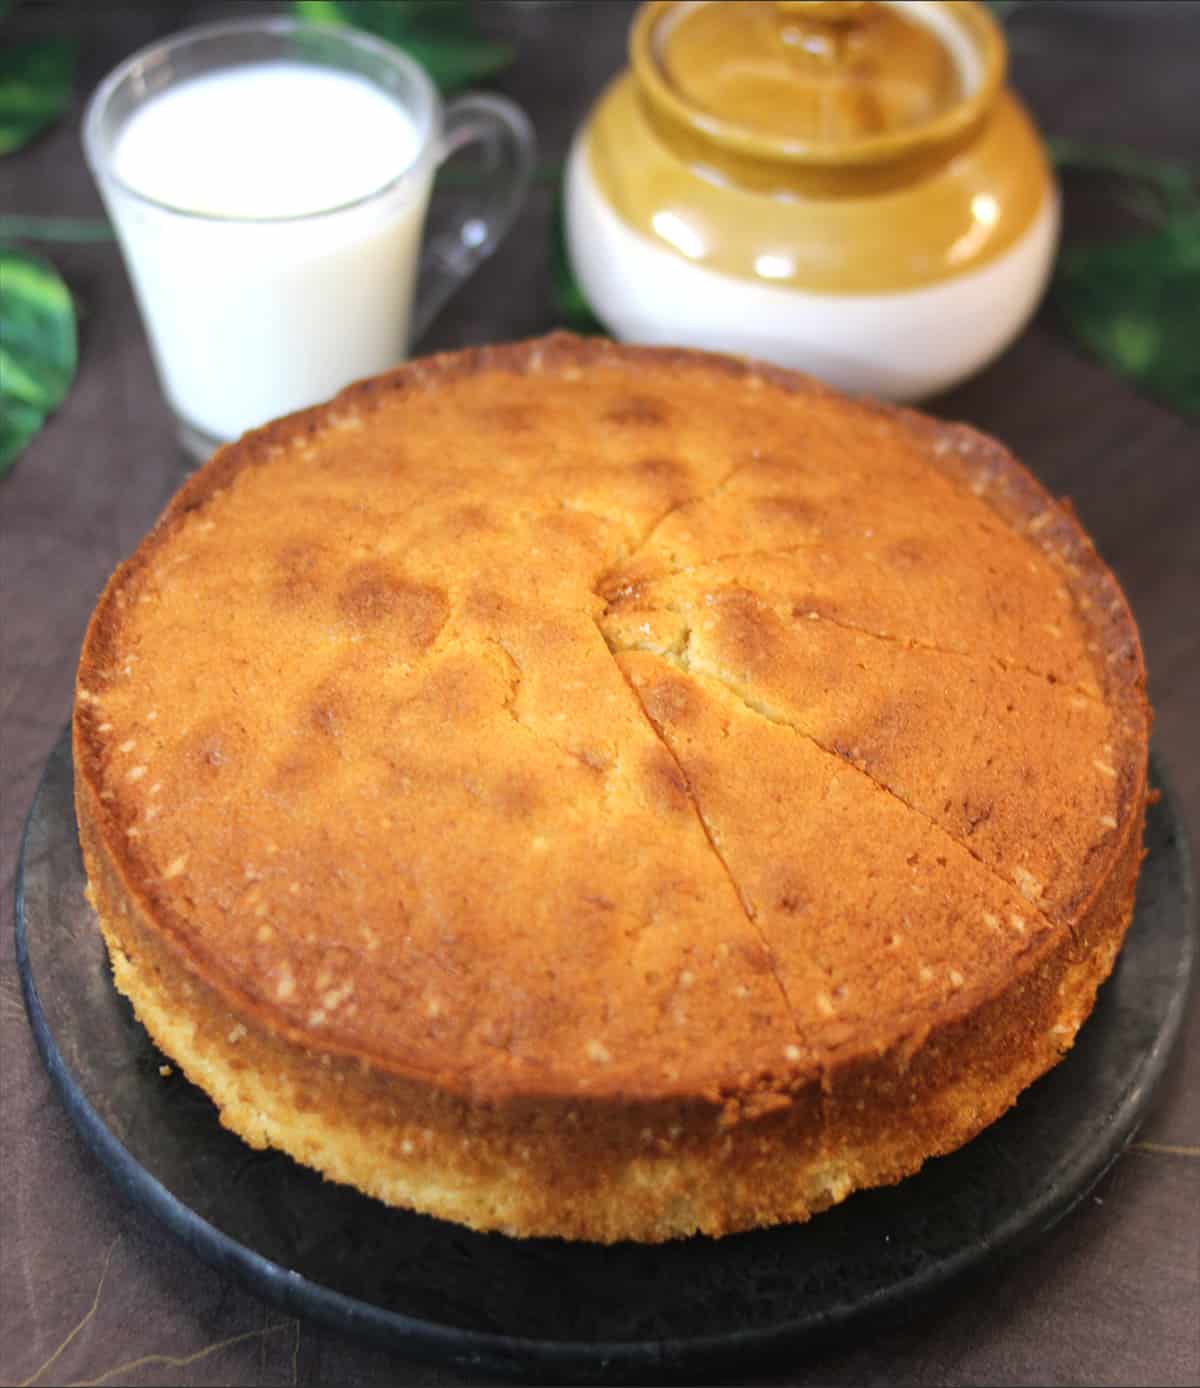 simple butter cake recipe served with milk, tea or coffee